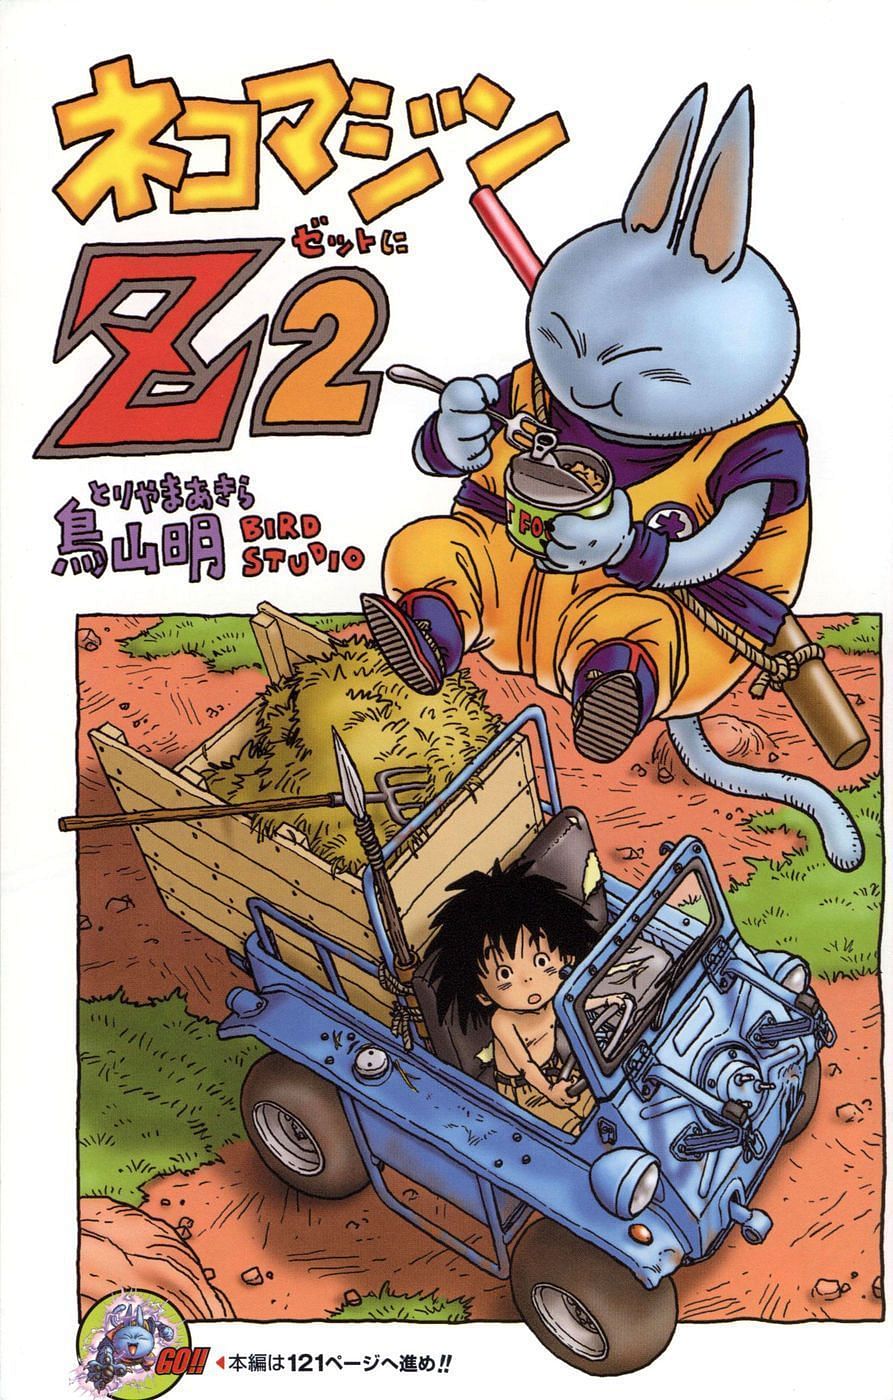 The cover of Nekomajin Z Issue 2, featuring our feline protagonist and a strange looking boy below him (Image via Shueisha)